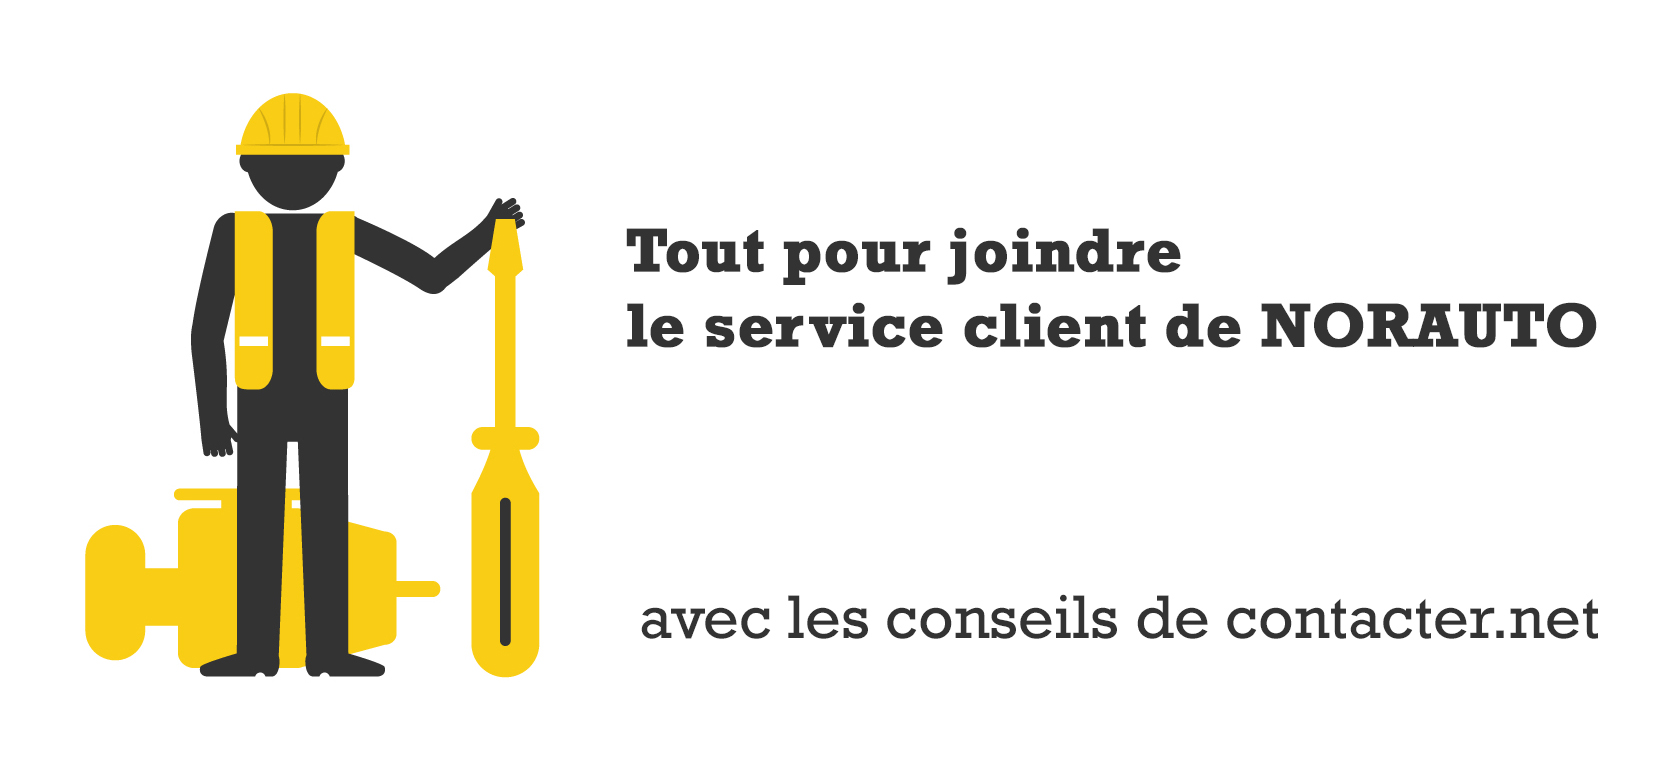 joindre service client norauto